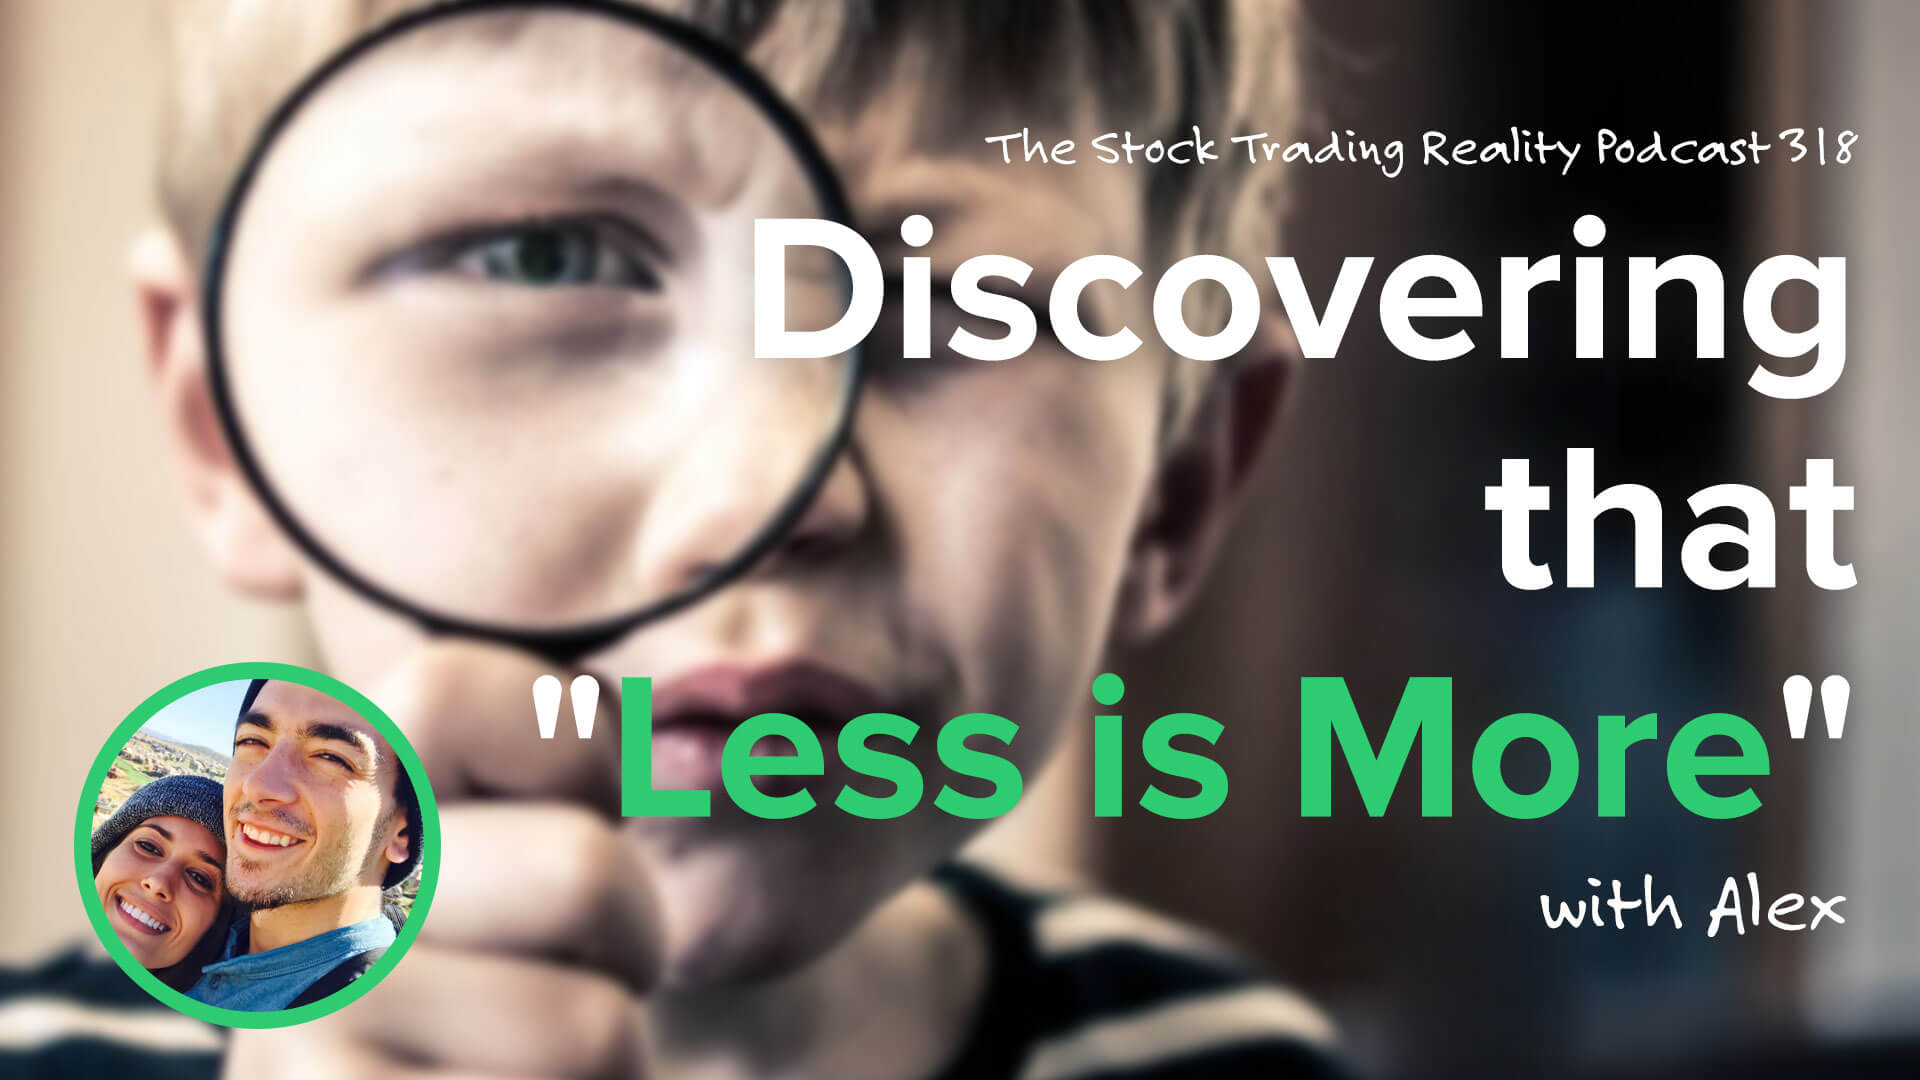 Discovering that "Less is More"... | STR 318